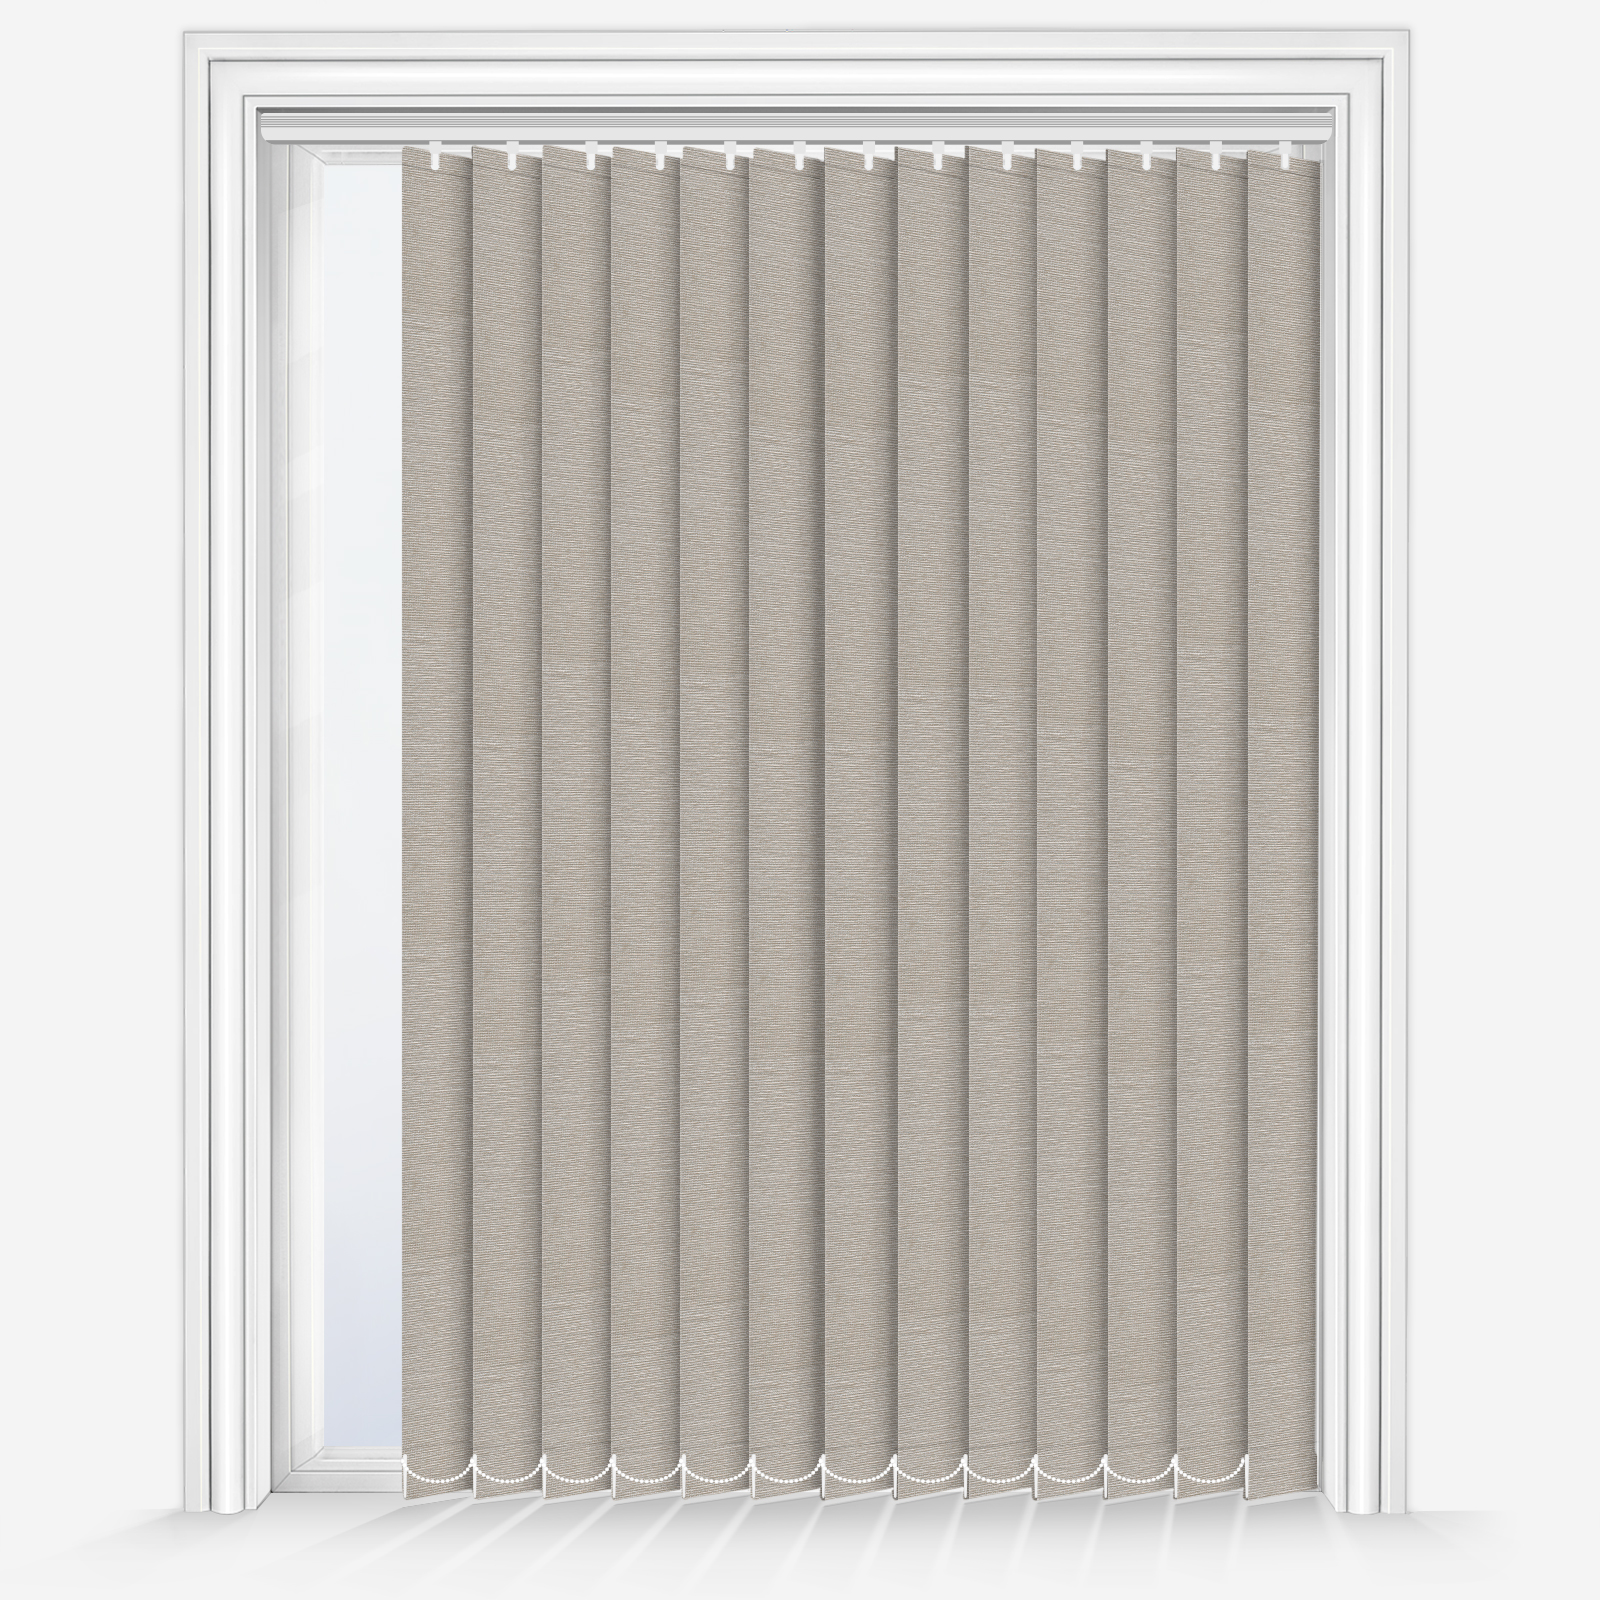 TUNDRA GREY MARL Roller Blinds by Louvolite